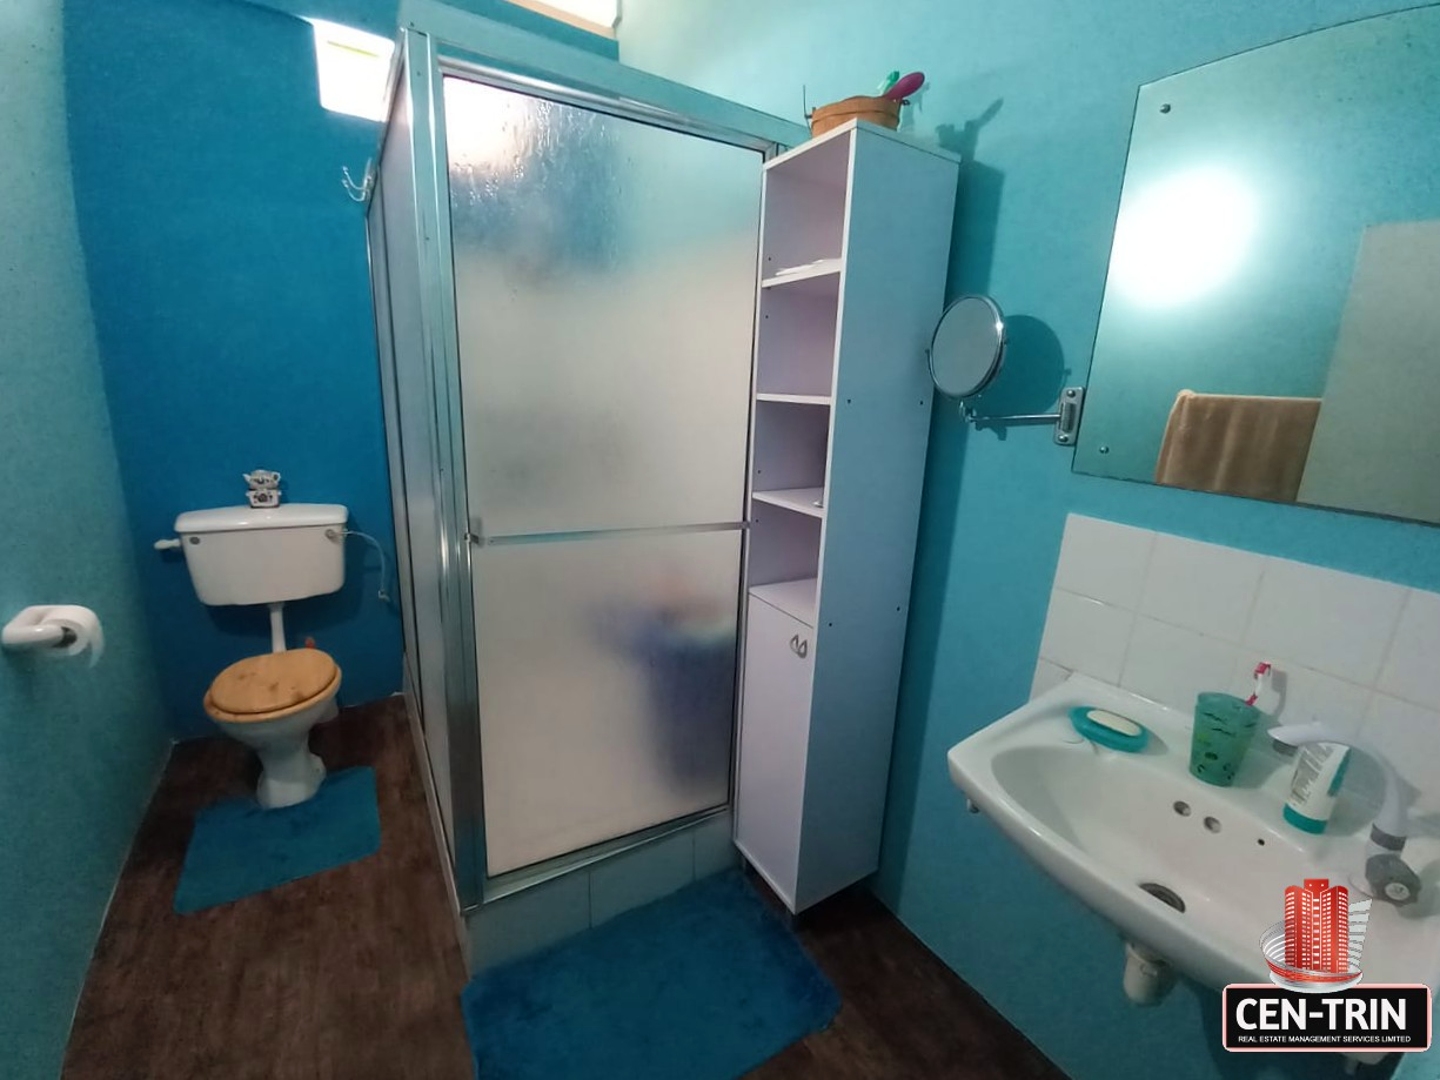 A bathroom with a toilet, sink with faucet, and a shower with a glass door.